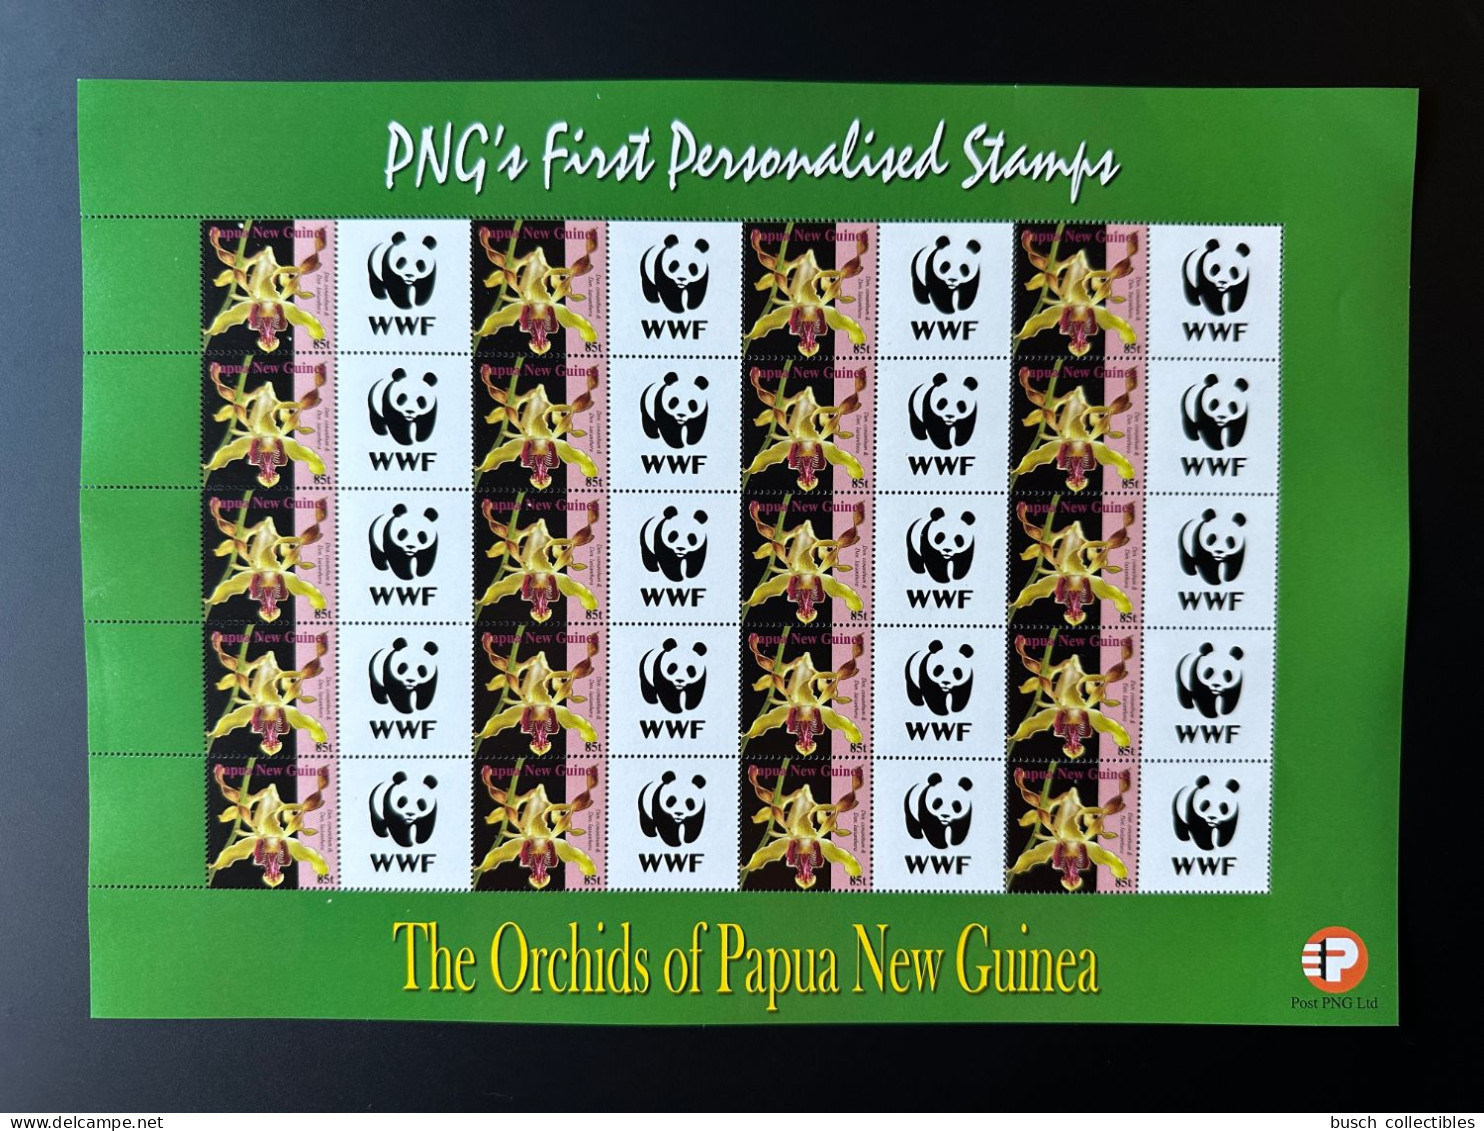 Papua New Guinea PNG 2007 Mi. 1244 Personalized WWF World Wide Fund For Nature Panda Faune Fauna Orchids Flowers - Bears